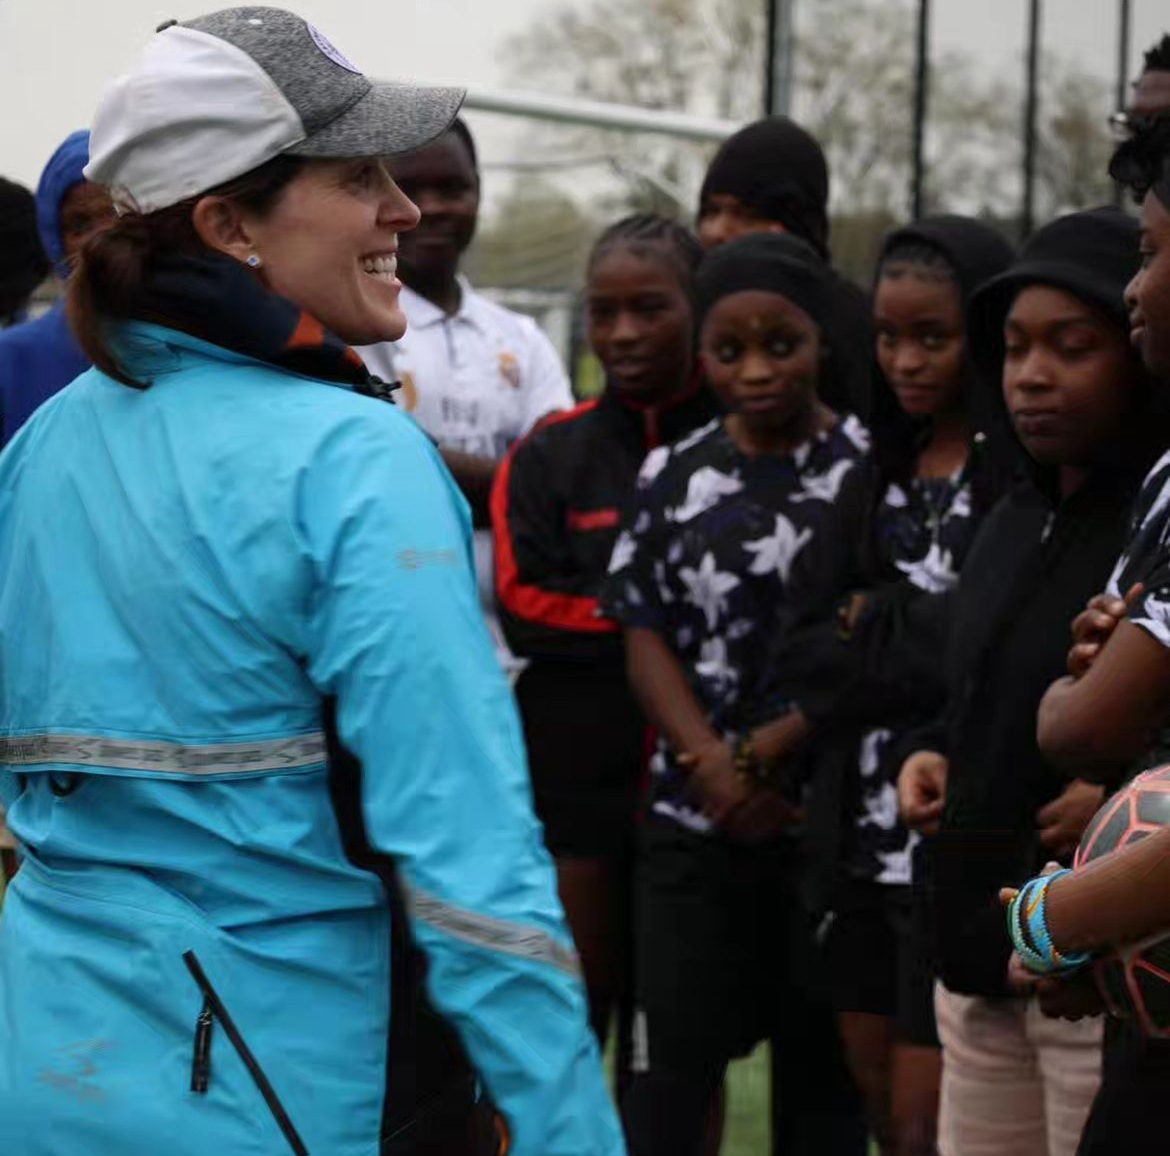 The Impact of #Partnerships blog on an amazing initiative supporting #highschool refugee girls, soccer, body confidence, & feeling good when playing sport! Thanks to the partners involved. @Nike @Dove #DoveSelfEsteemProject #BodyConfidentSport #DovePartner
cairnguidance.com/blog/2024/05/t…